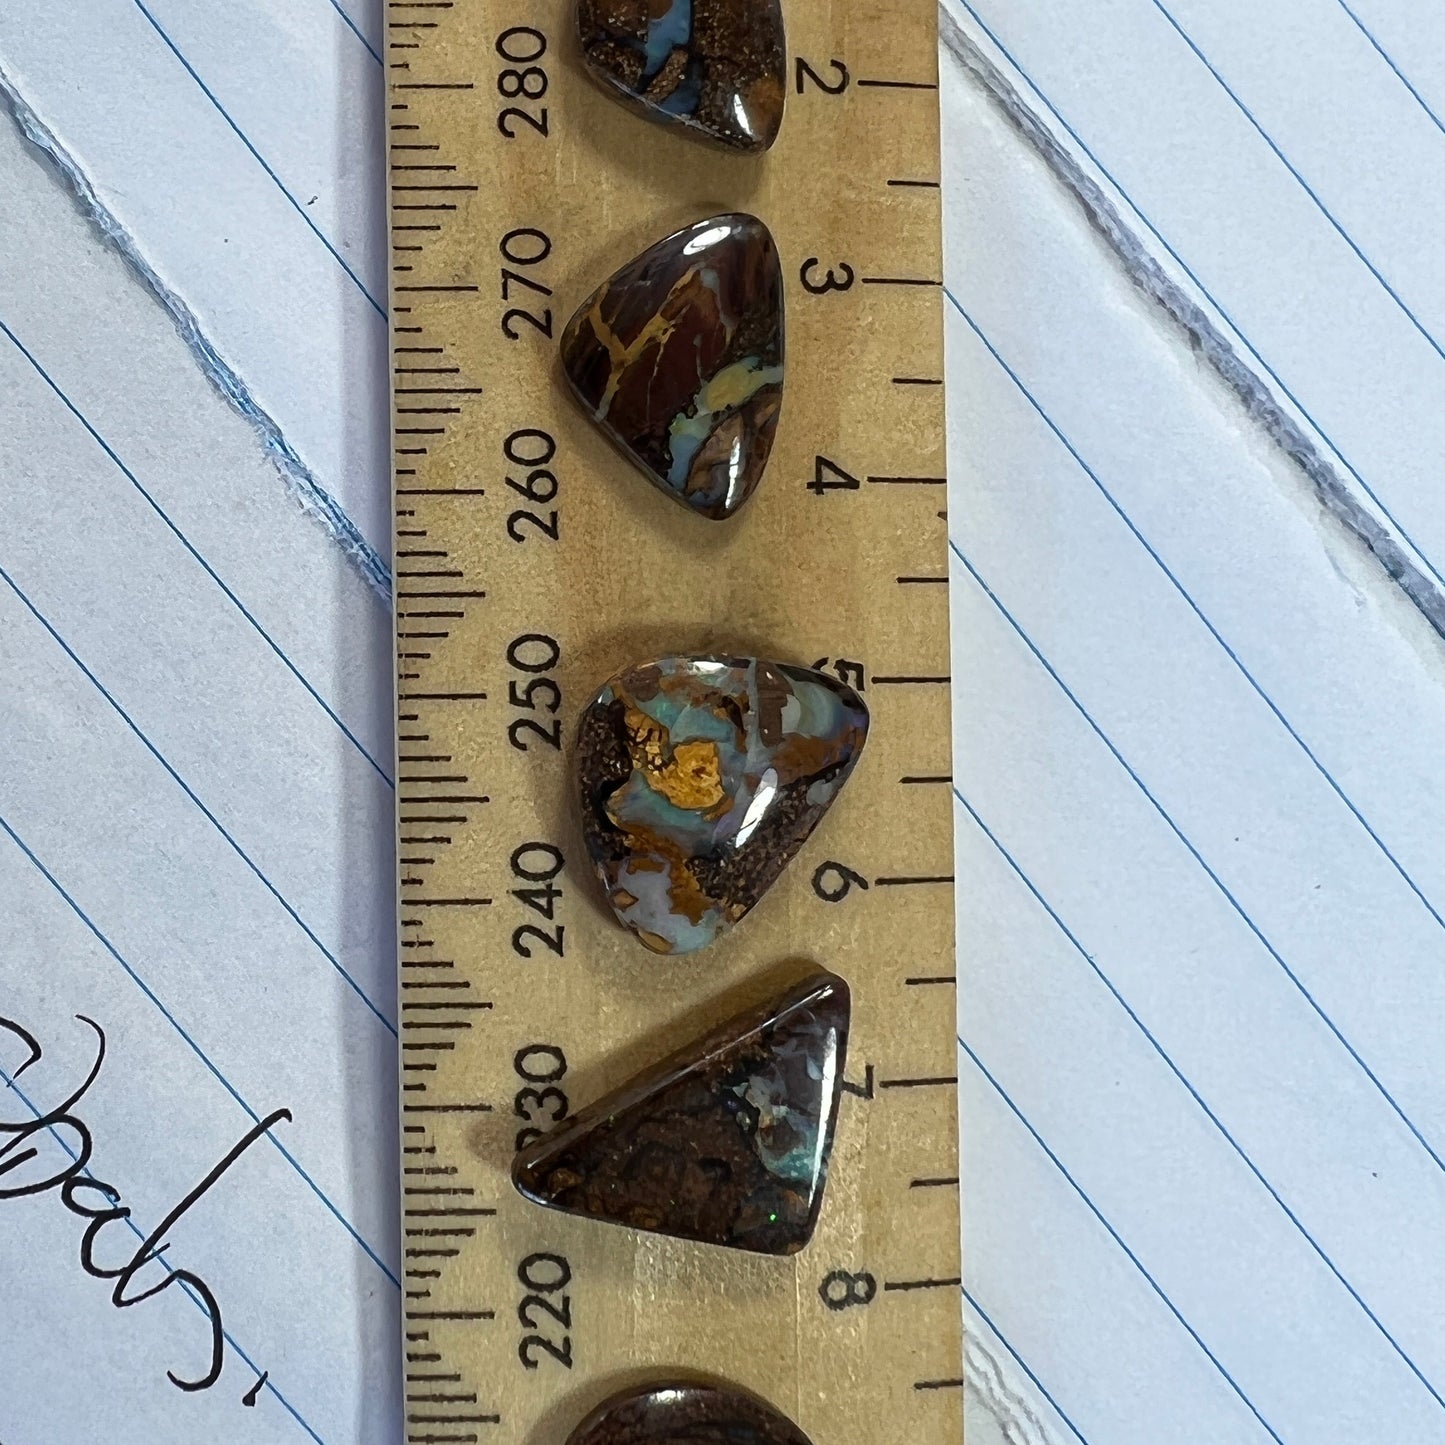 Boulder opal bundle containing 5 beautiful opals from Winton, Queensland. Polished and ready to set.